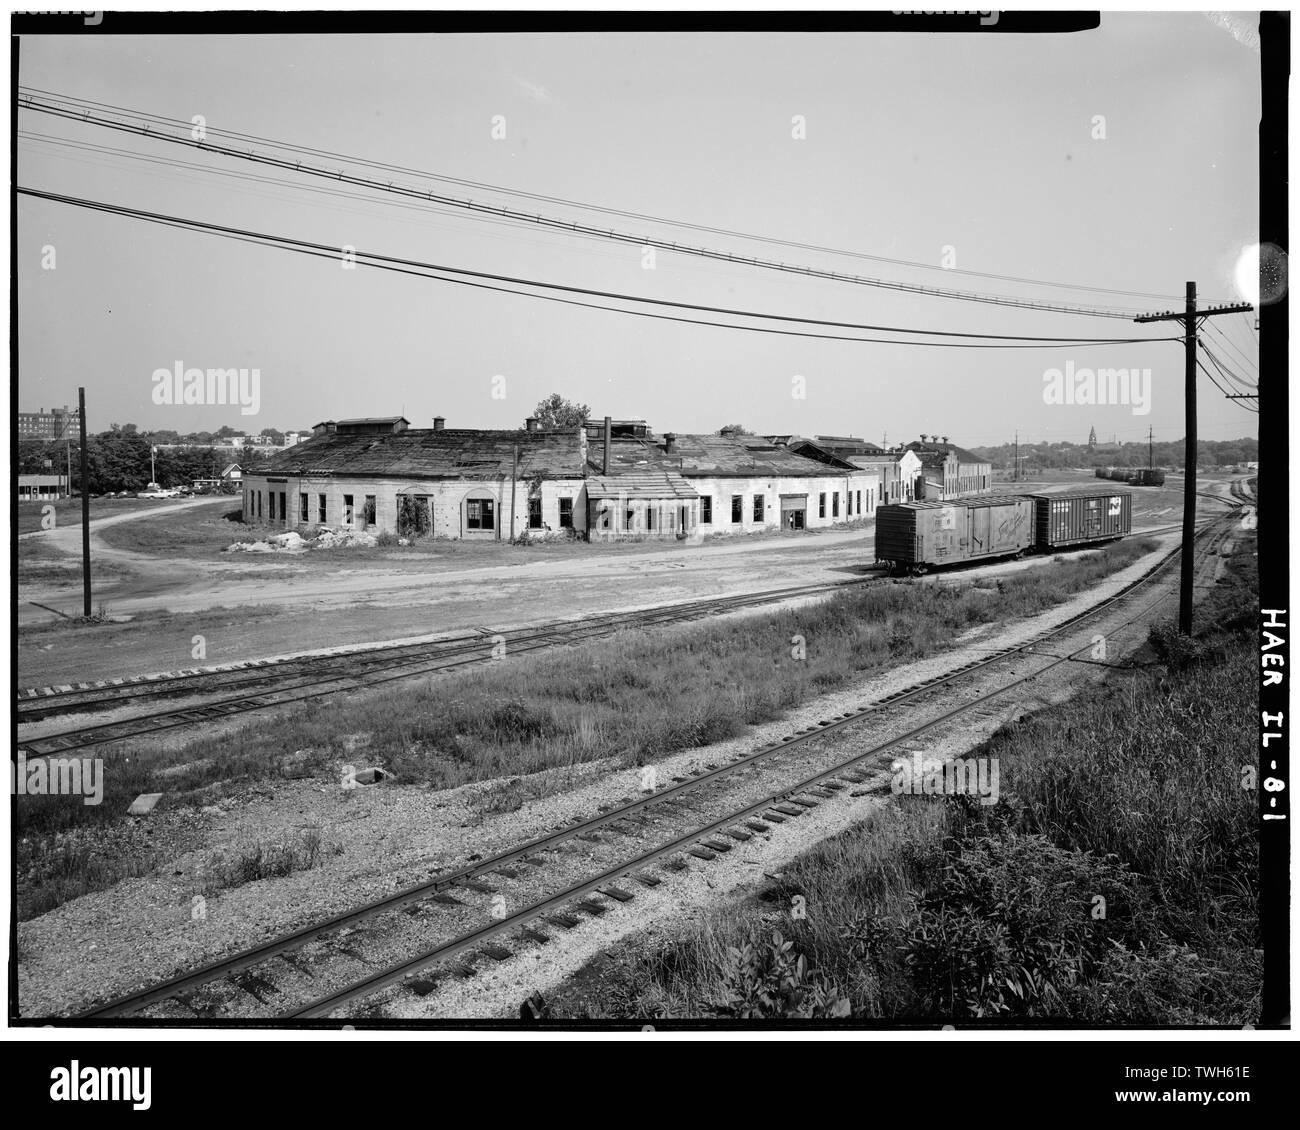 Roadhouse and shops from the Chicago, Burlington and Quincy railroad mainline, facing northeast - Chicago, Burlington and Quincy Railroad, Roundhouse and Shops, Broadway and Spring Streets, Aurora, Kane County, IL Stock Photo